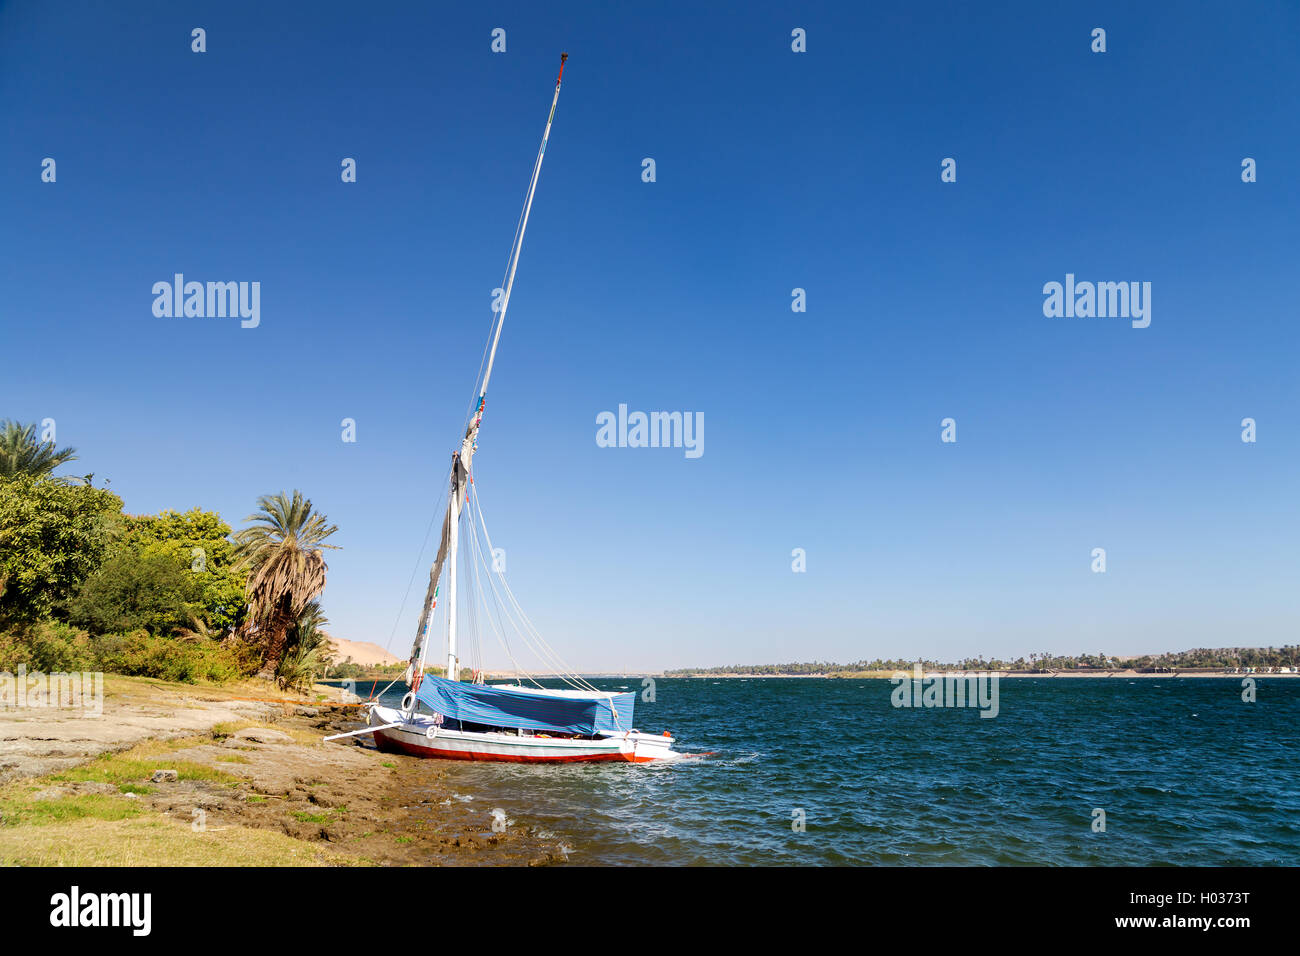 Traditional Wooden Sailing Boat Stock Photos &amp; Traditional ...